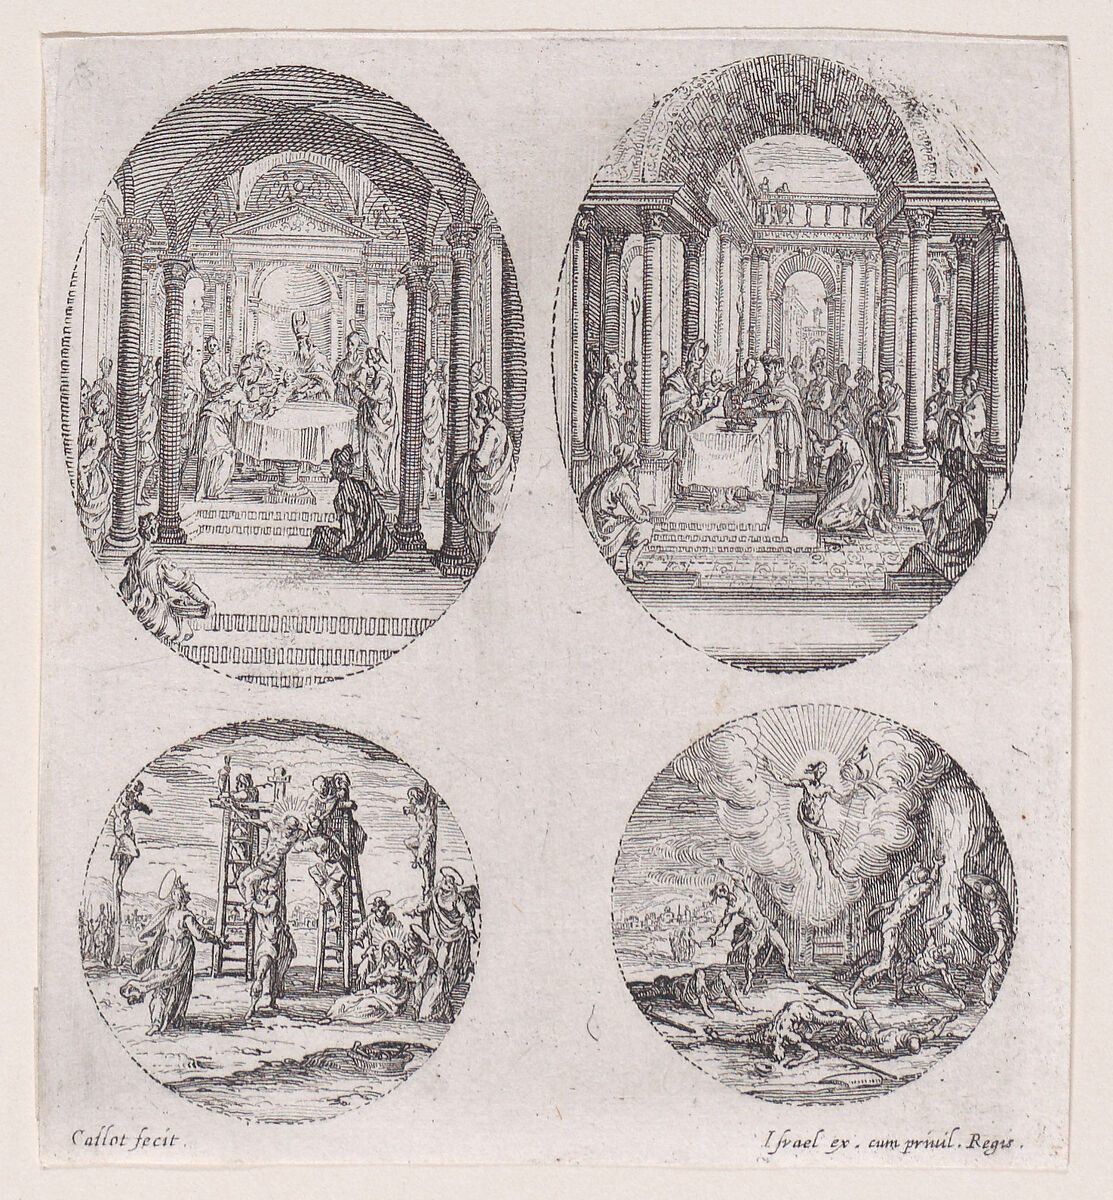 Oval Medallions and Rondels, from "Variae tum Passionis Christi tum vitae beatae Mariae Virginis; Les Mystères de la Passion suite appelée aussi Mystères de la Vie de Jésus et Mystères de la Vie de Jésus et de la Vie de la Ste. Vierge" (The Mysteries of the Passion, also called the Mysteries of the Life of Jesus, and the Mysteries of the Life of Jesus and of the Virgin), Jacques Callot (French, Nancy 1592–1635 Nancy), Etching and engraving; second state of two (Lieure) 